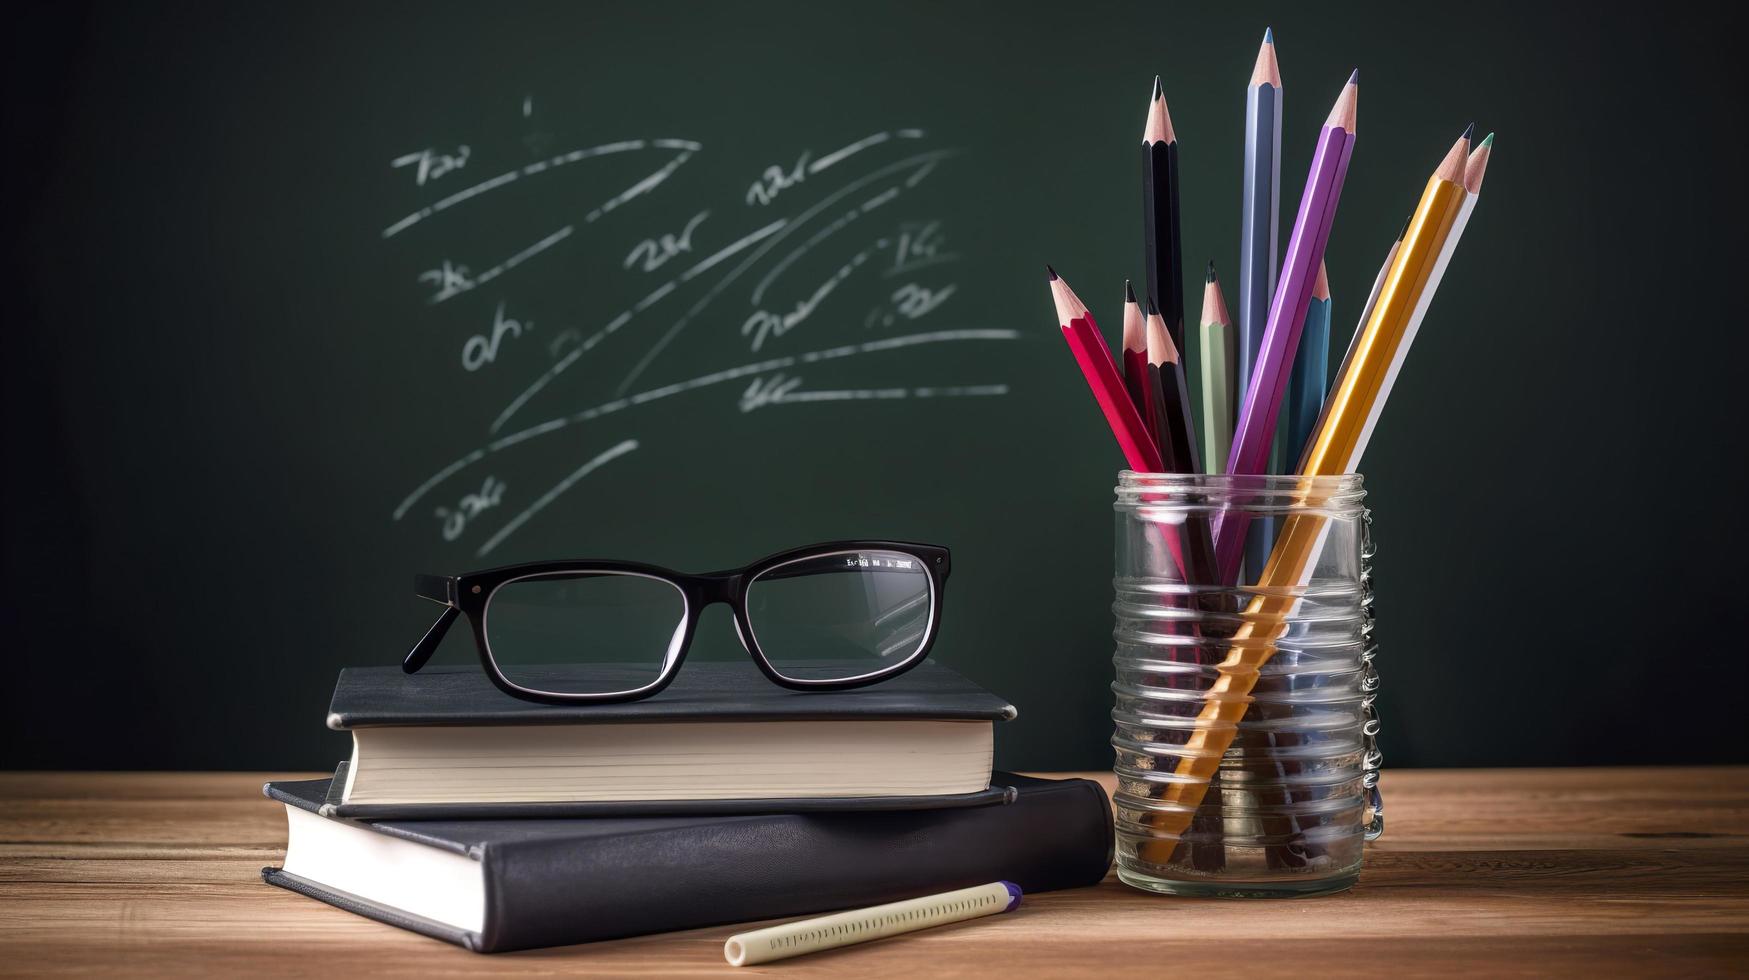 Free photo stack of books with pencil holder and glasses against a chalkboard